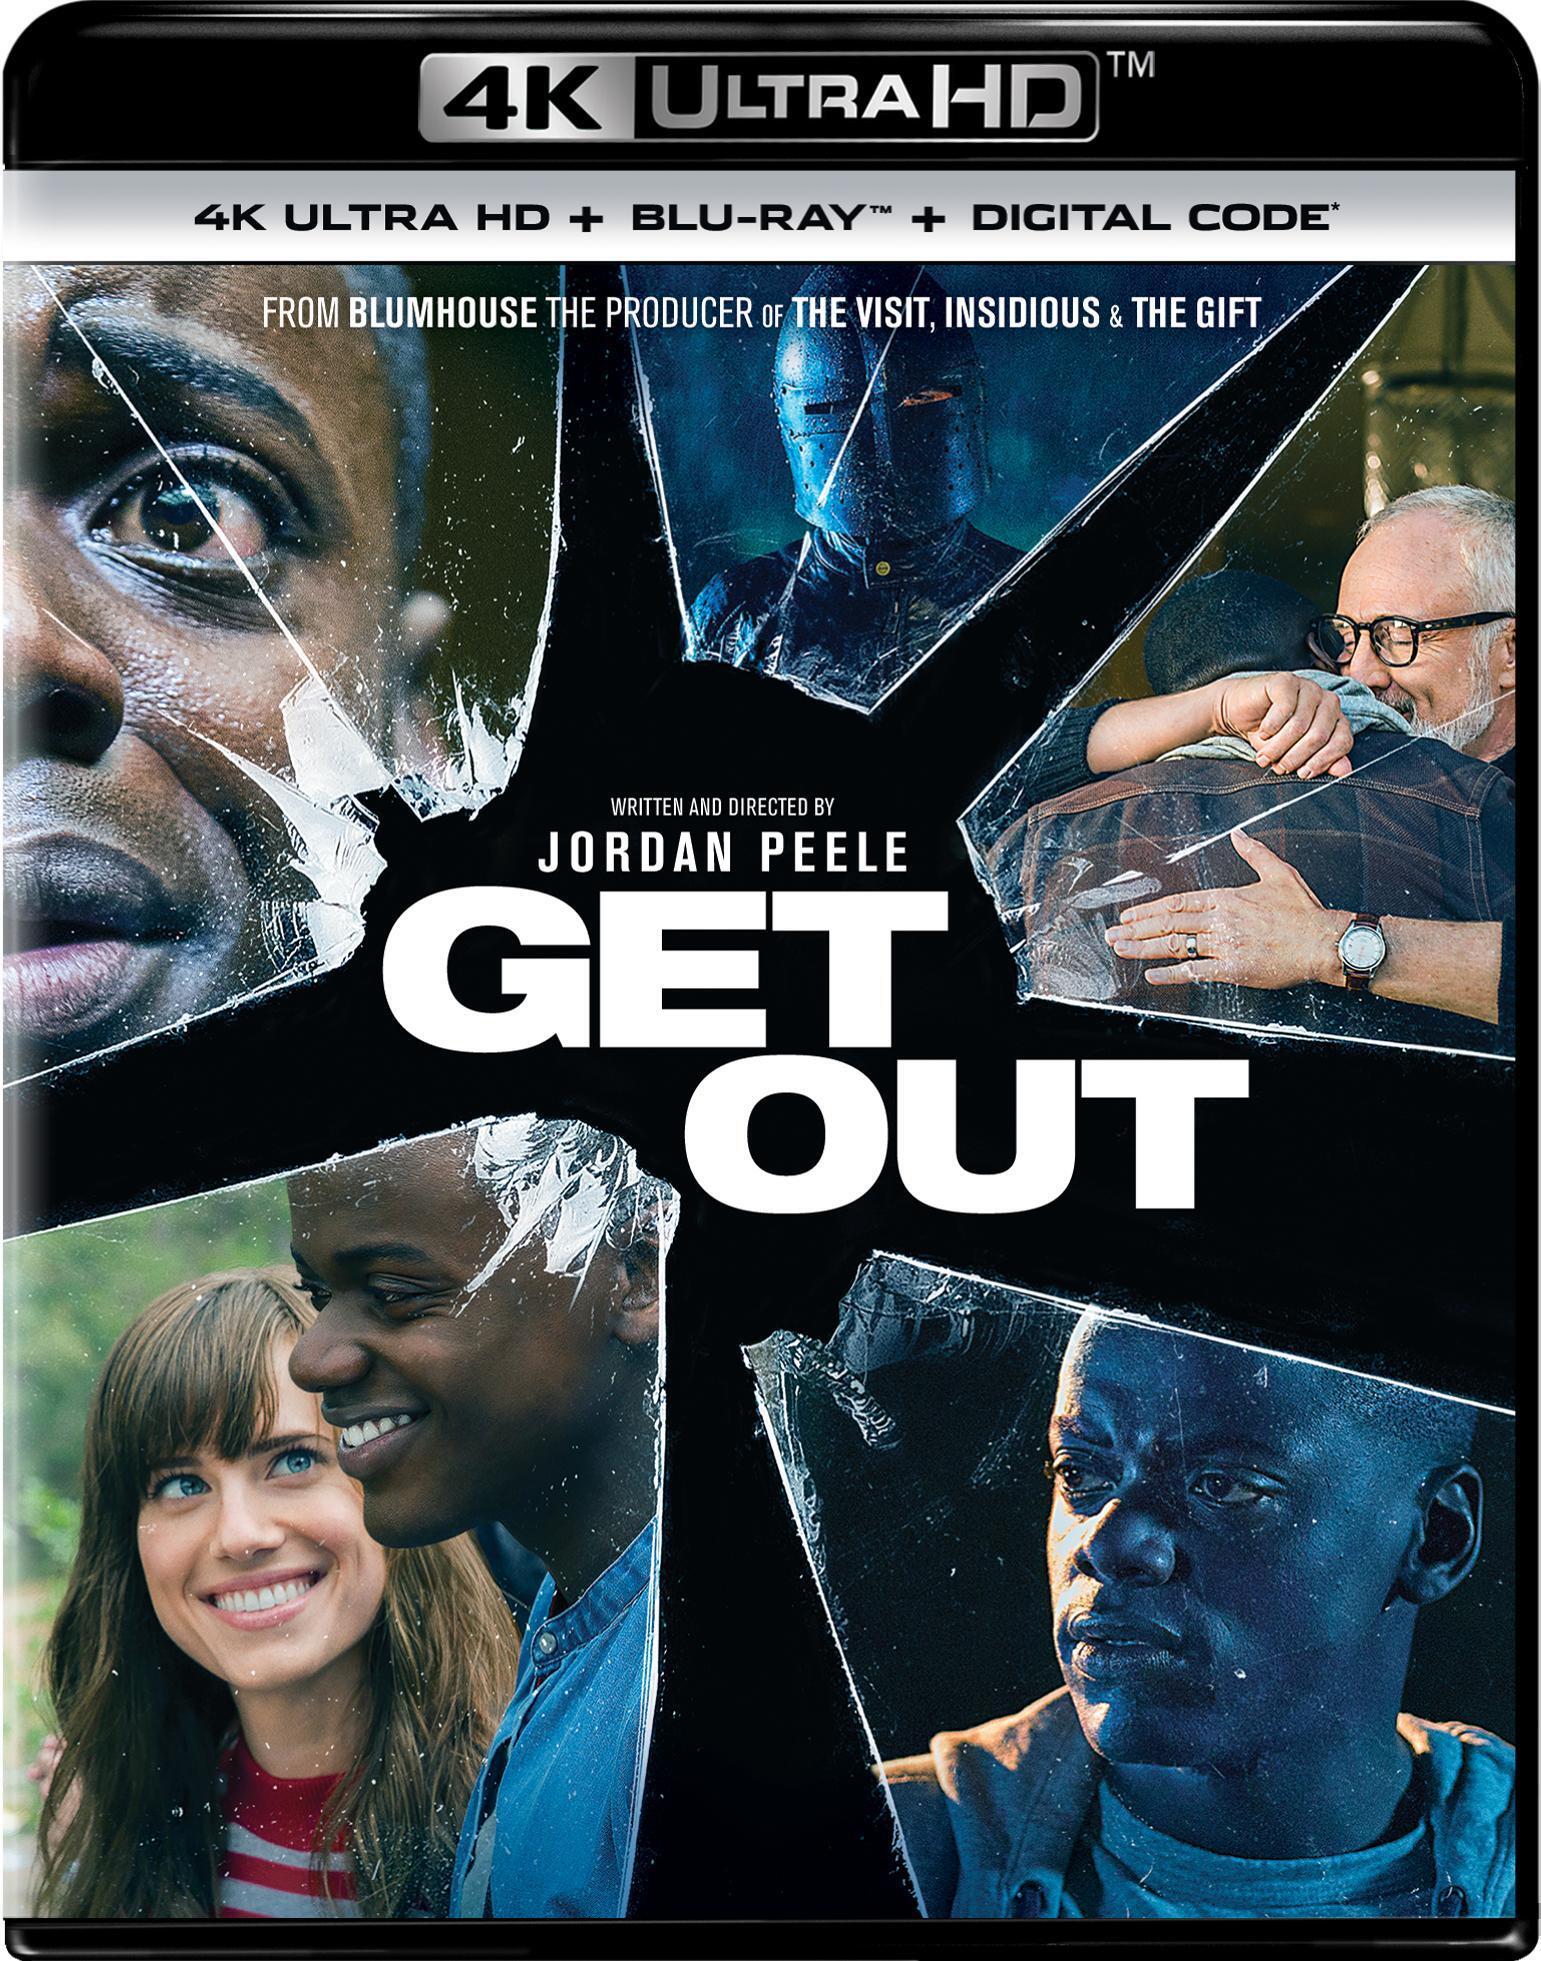 Get Out (4K Ultra HD) - UHD [ 2017 ]  - Horror Movies On 4K Ultra HD Blu-ray - Movies On GRUV